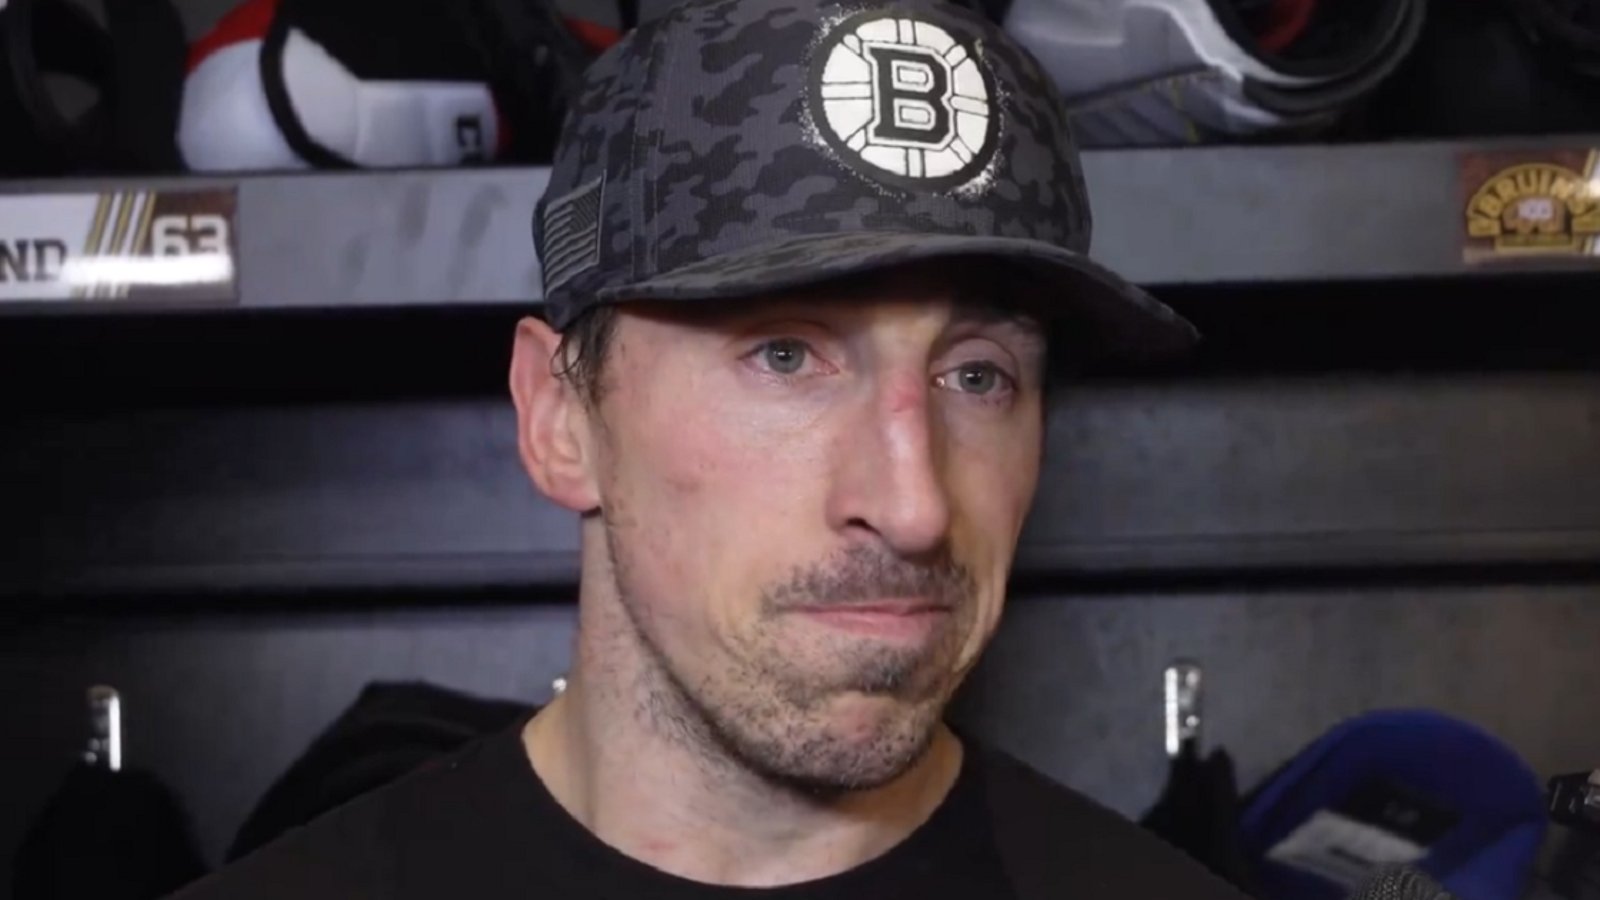 Marchand stirs up controversy with comments about his injury.